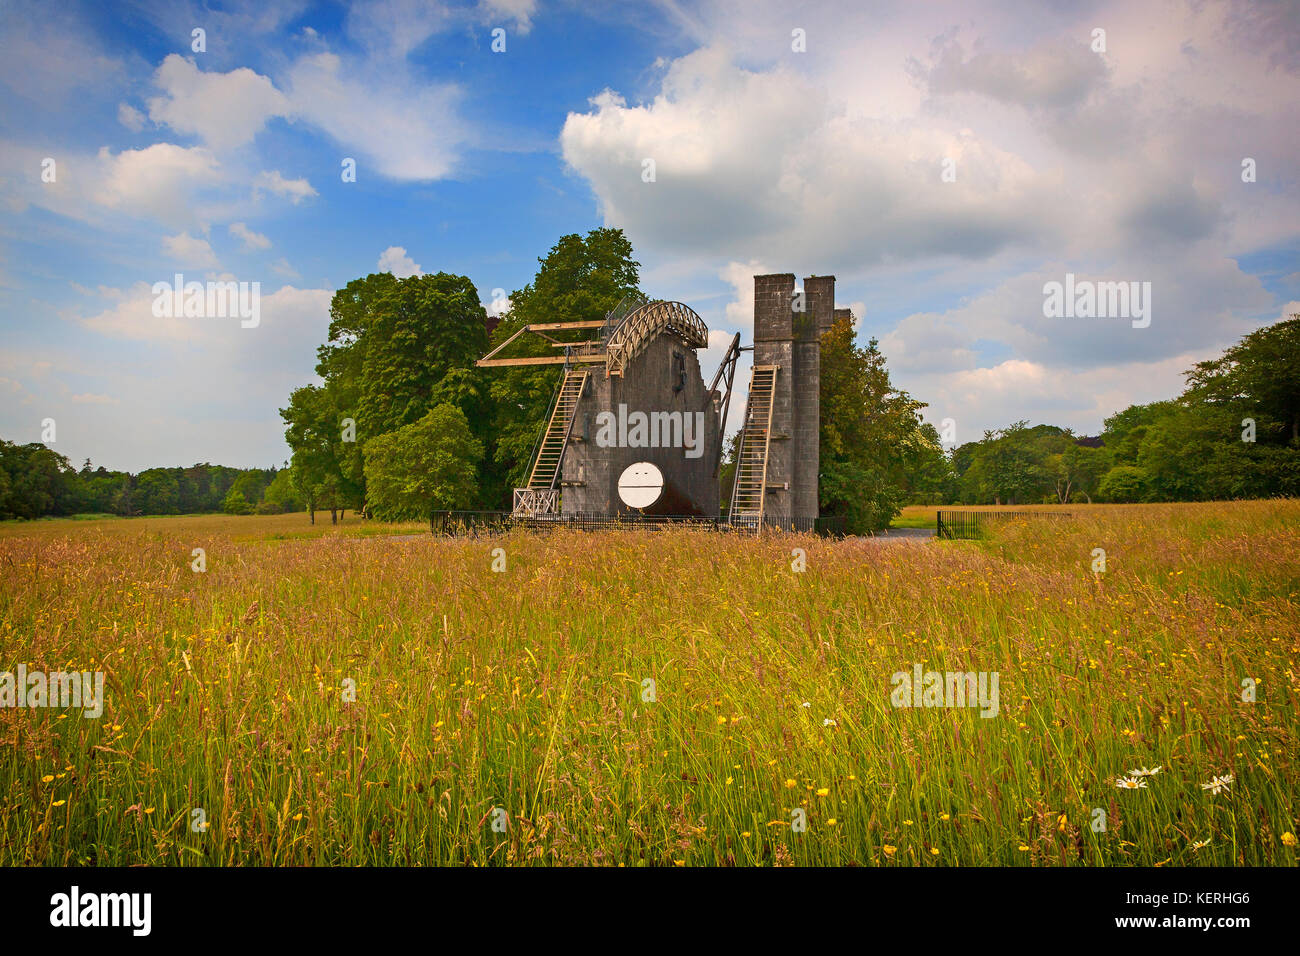 The Leviathon, 19th Century (1845) Astronomical Telescope, Situated in a Wildflower Meadow, Birr Castle, County Offaly, Ireland Stock Photo